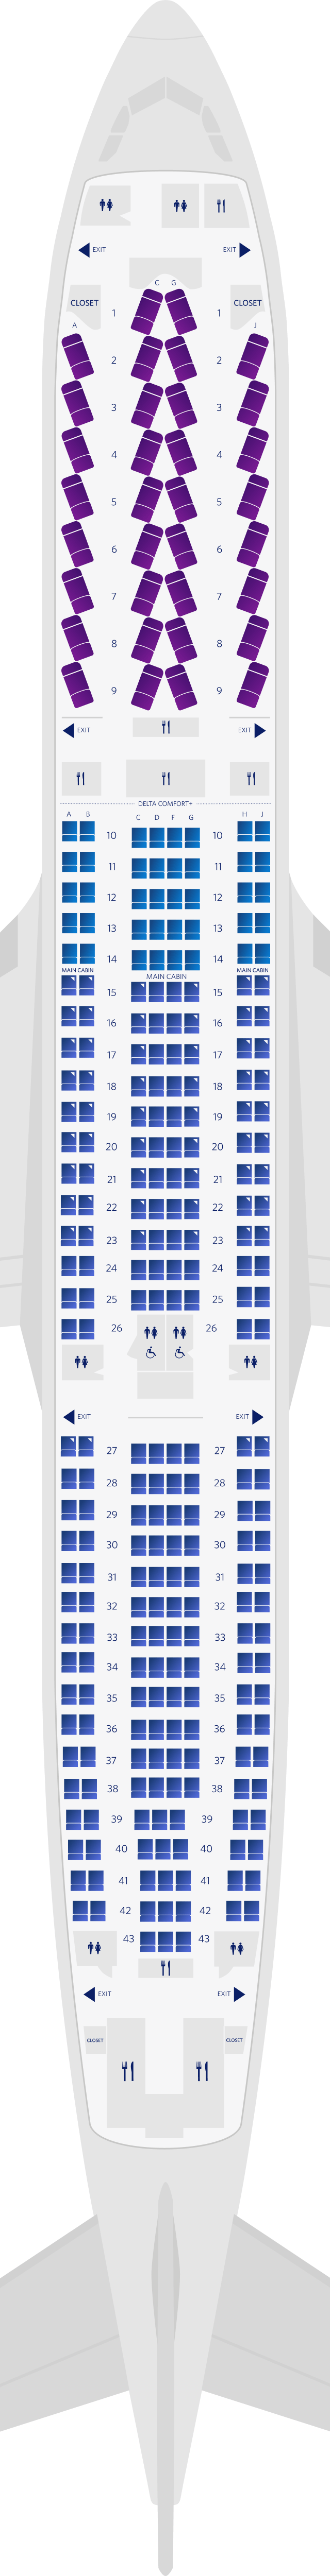 Airbus A300-300 3-Cabin Seat Map (333)